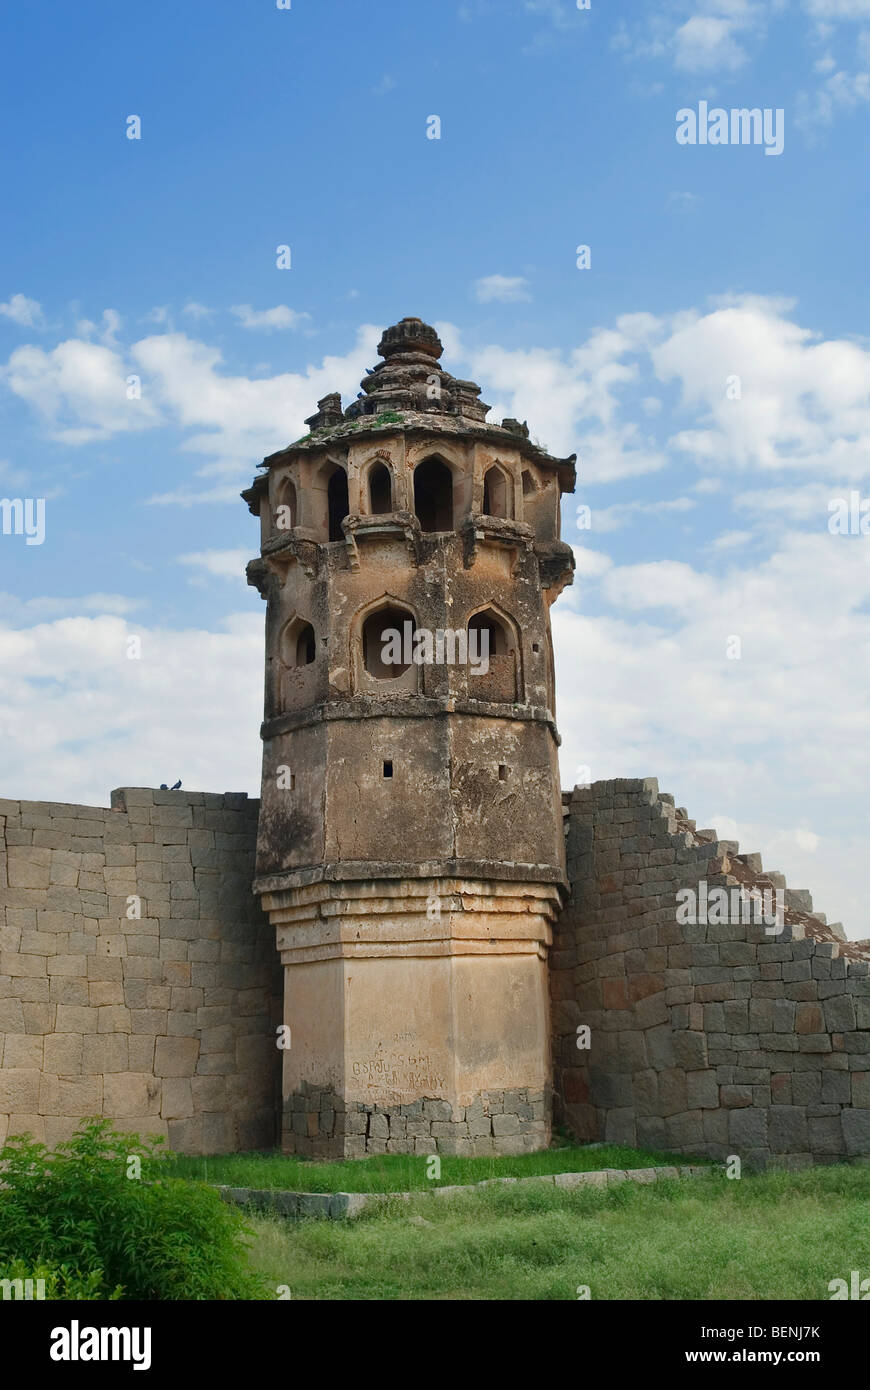 Watch towers built into the enclosure wall on each side to watch approaching threats to the Lotus Mahal Hampi Karnataka India Stock Photo